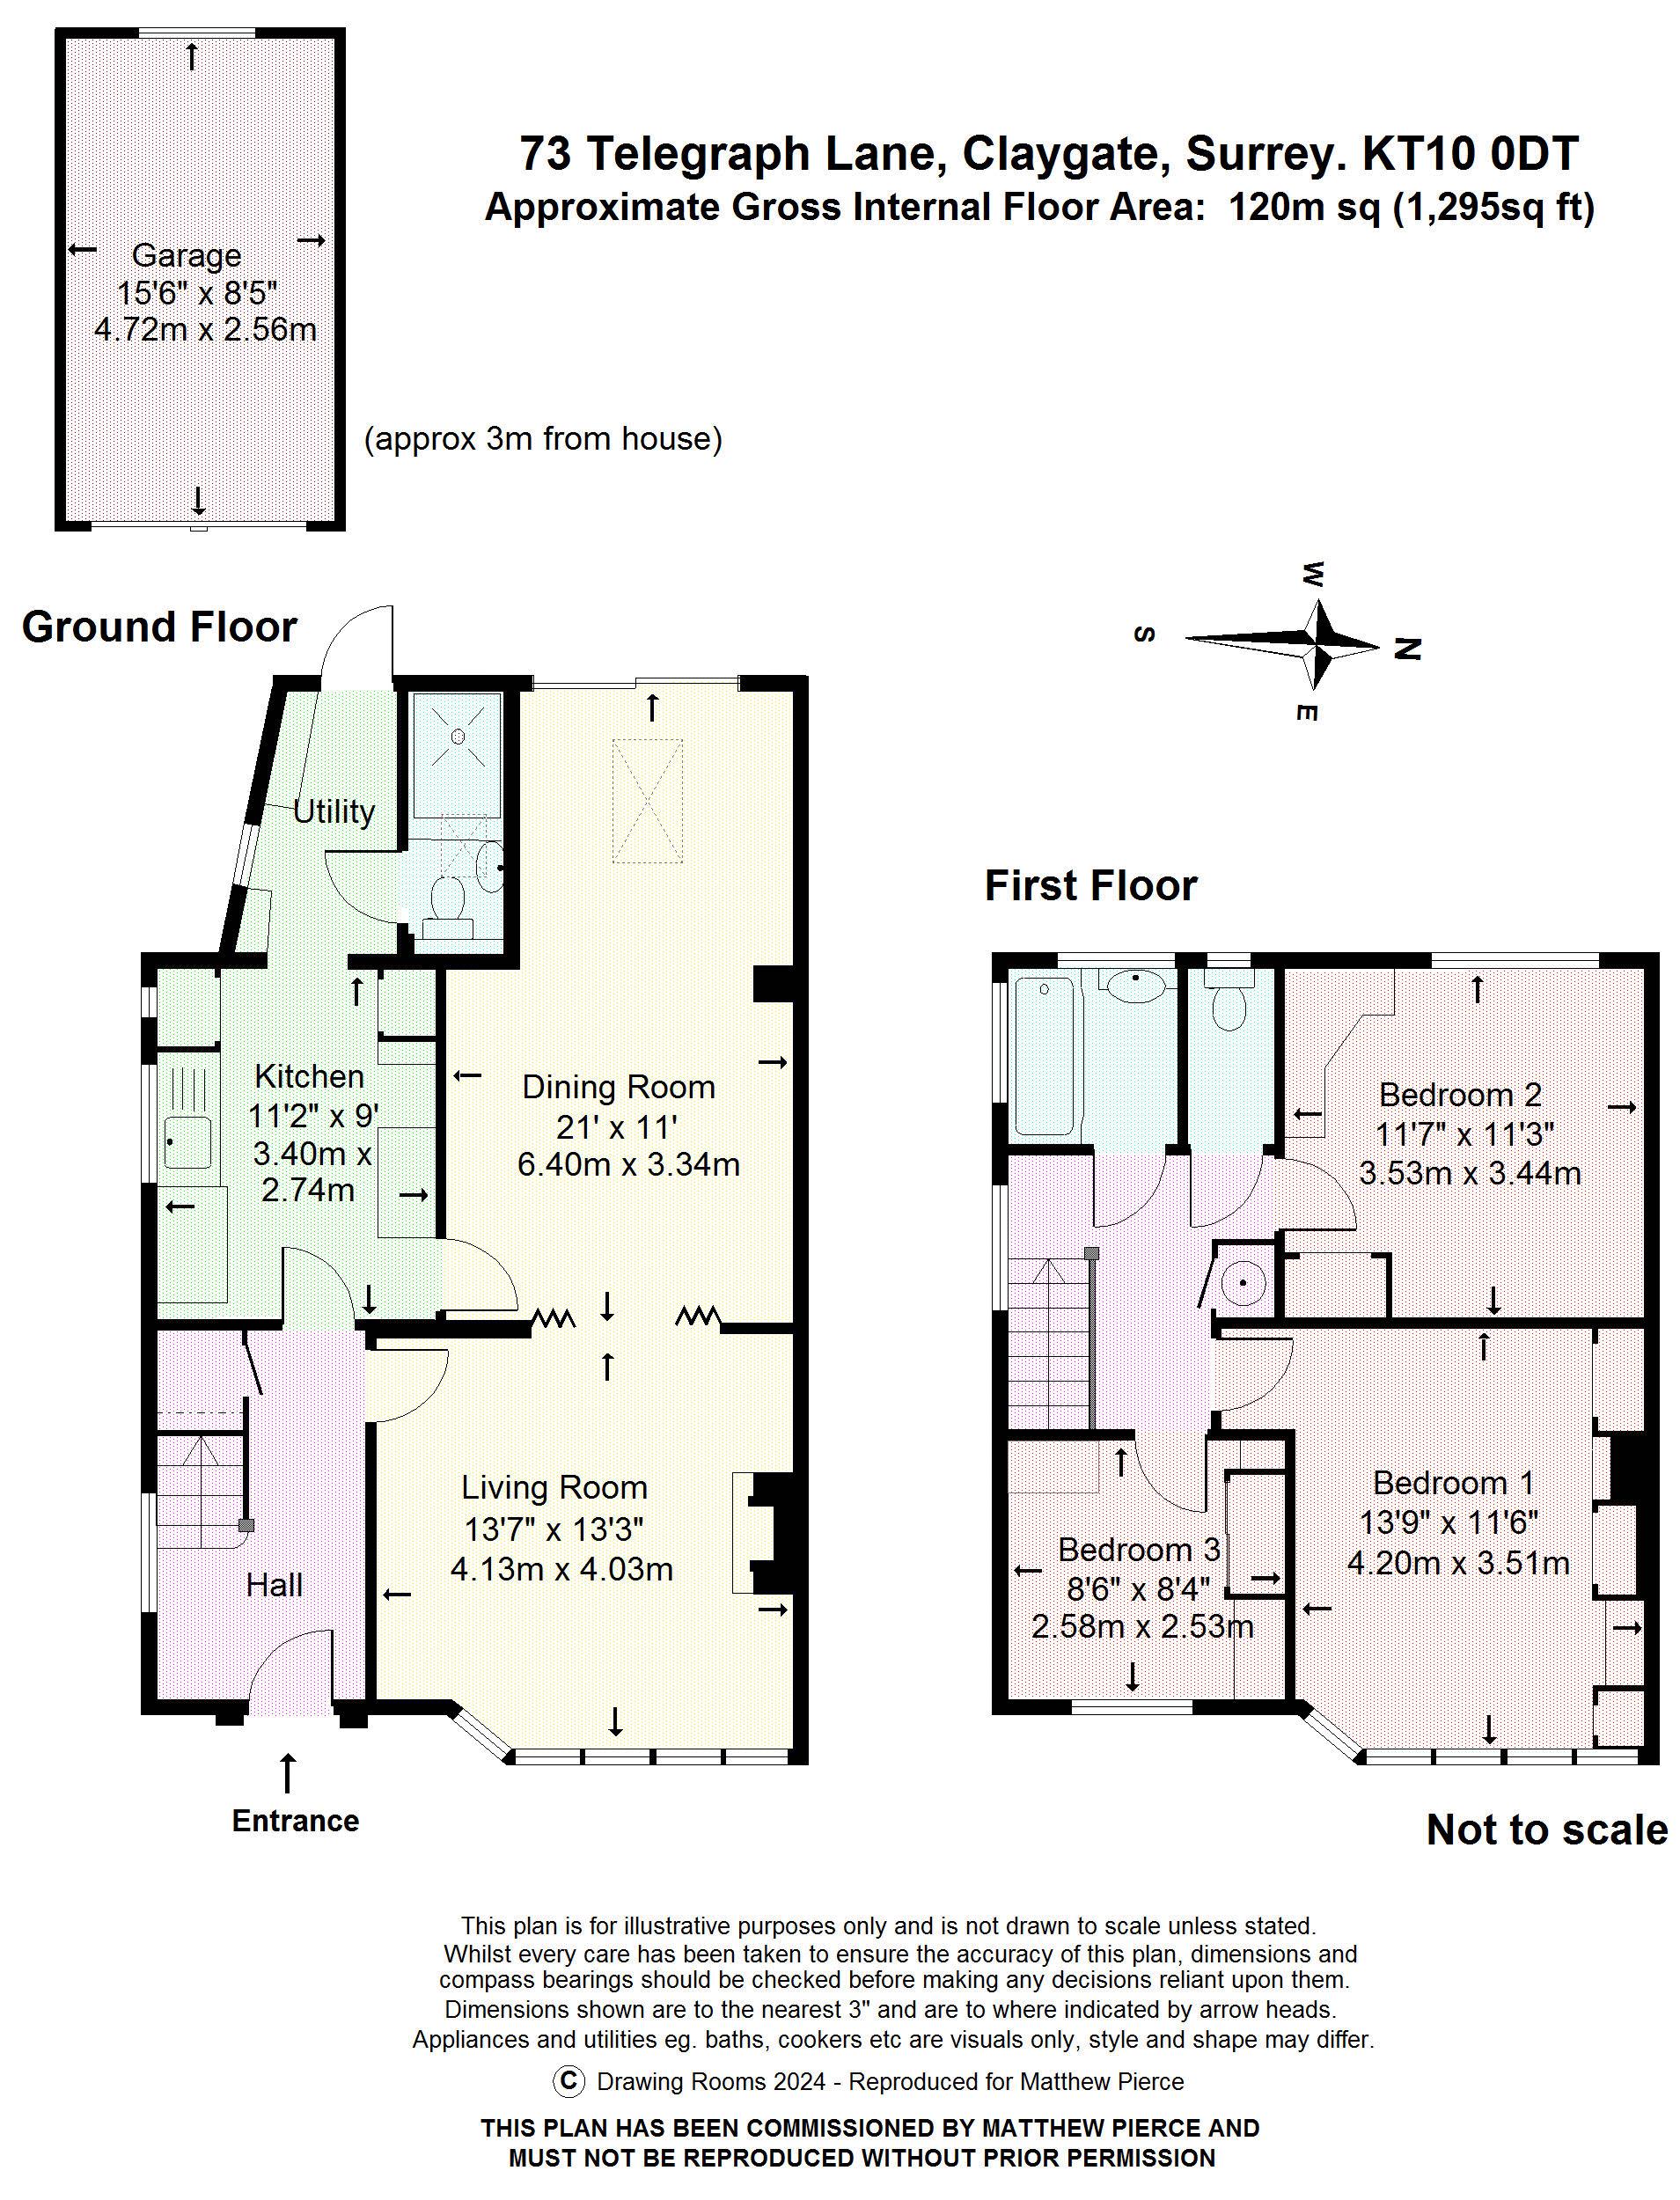 Floorplans For Telegraph Lane, Claygate